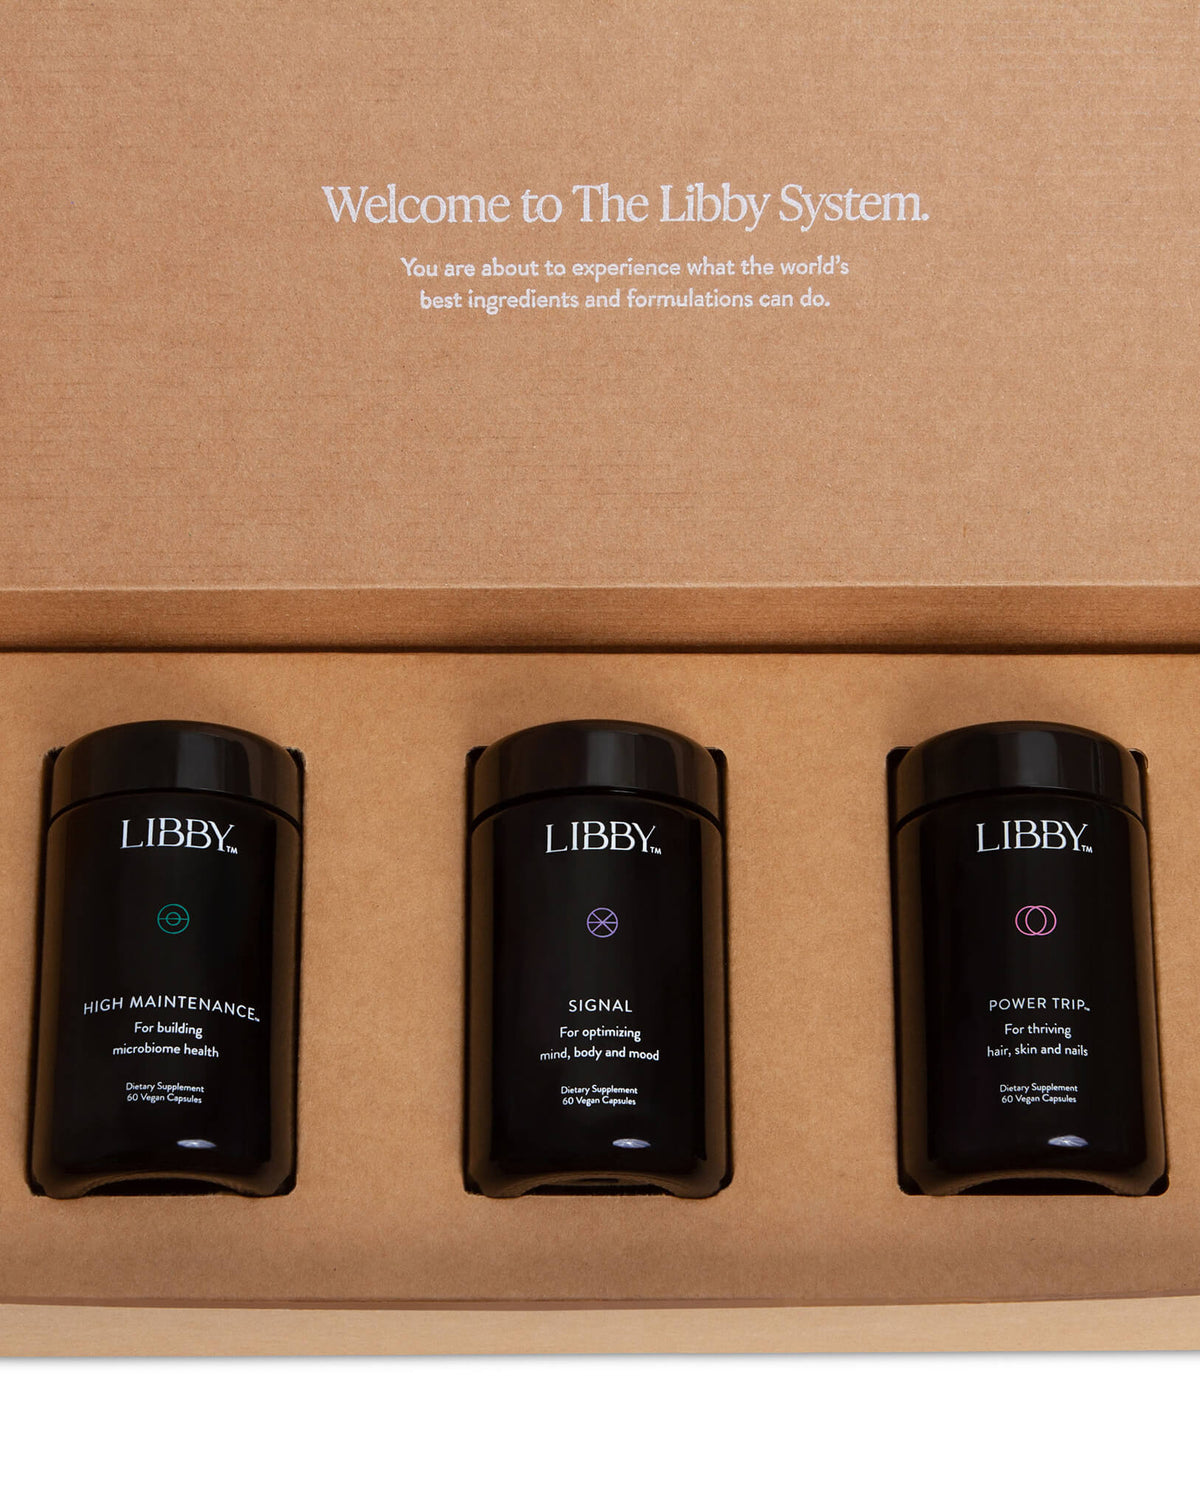 Packaging for The Libby System.